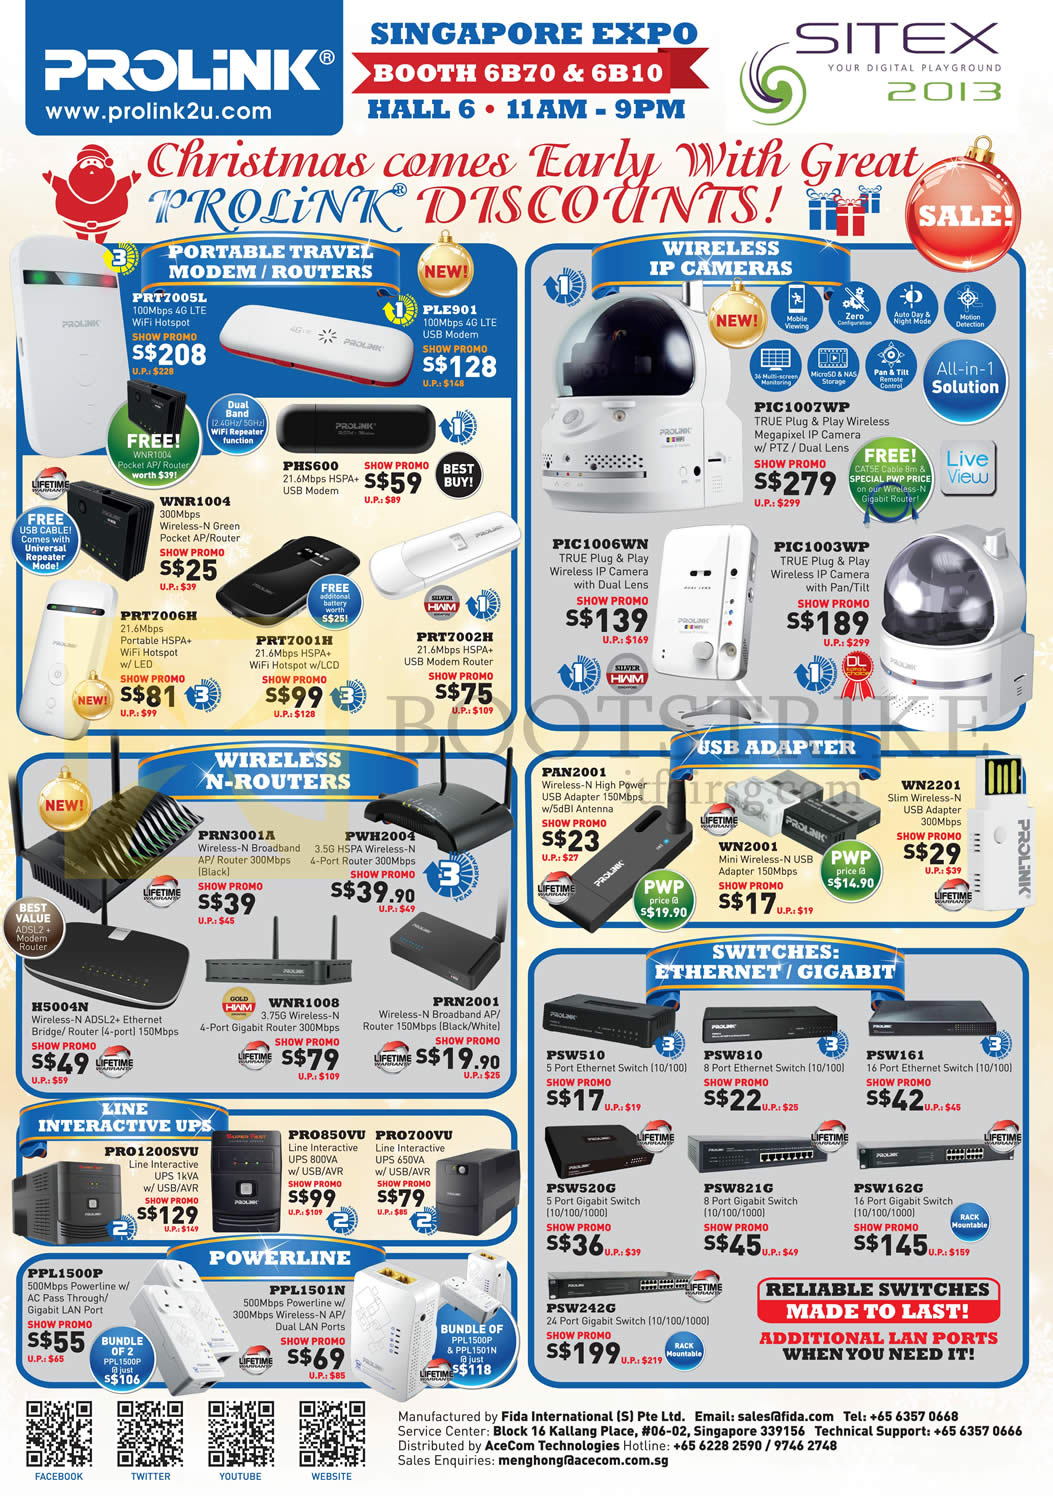 SITEX 2013 price list image brochure of Prolink Networking Wireless Routers, Portable Routers, Modem, IPCam Cameras, USB Adapters, Switches, Ethernet, Gigabit, Powerline, UPS